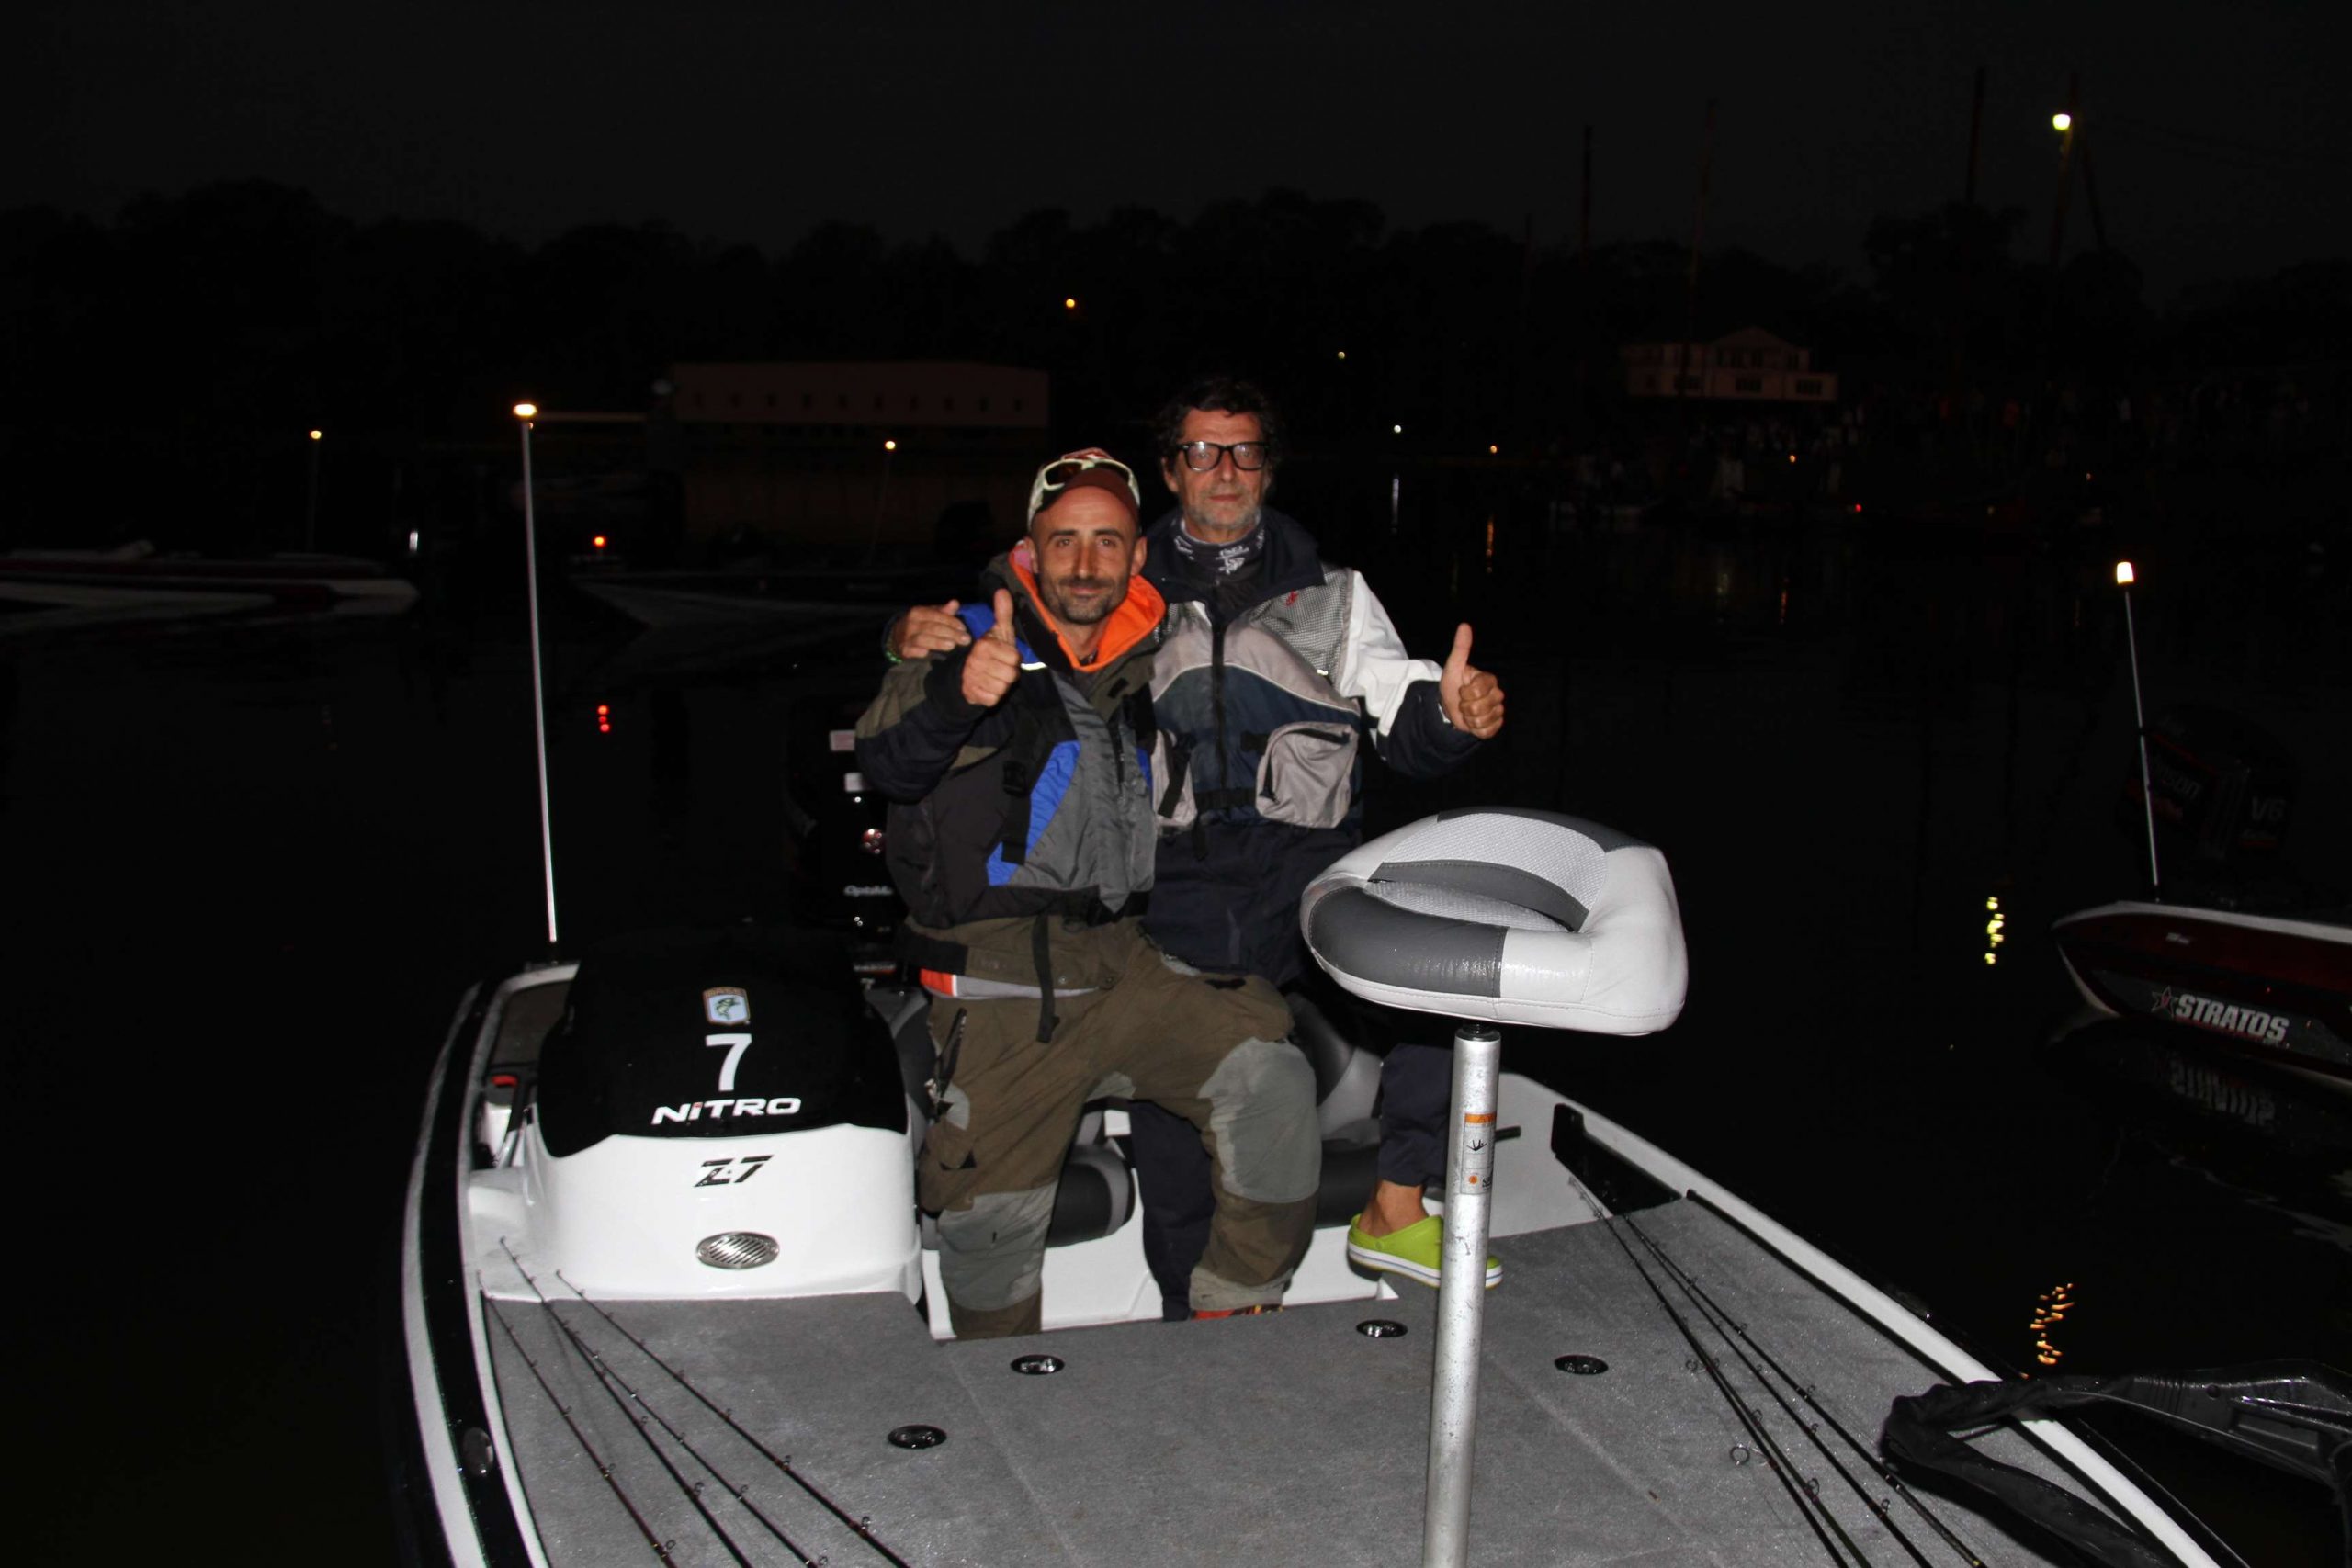 Italian angler Samuele Ferroni and his translator are ready to have a good day on the water.